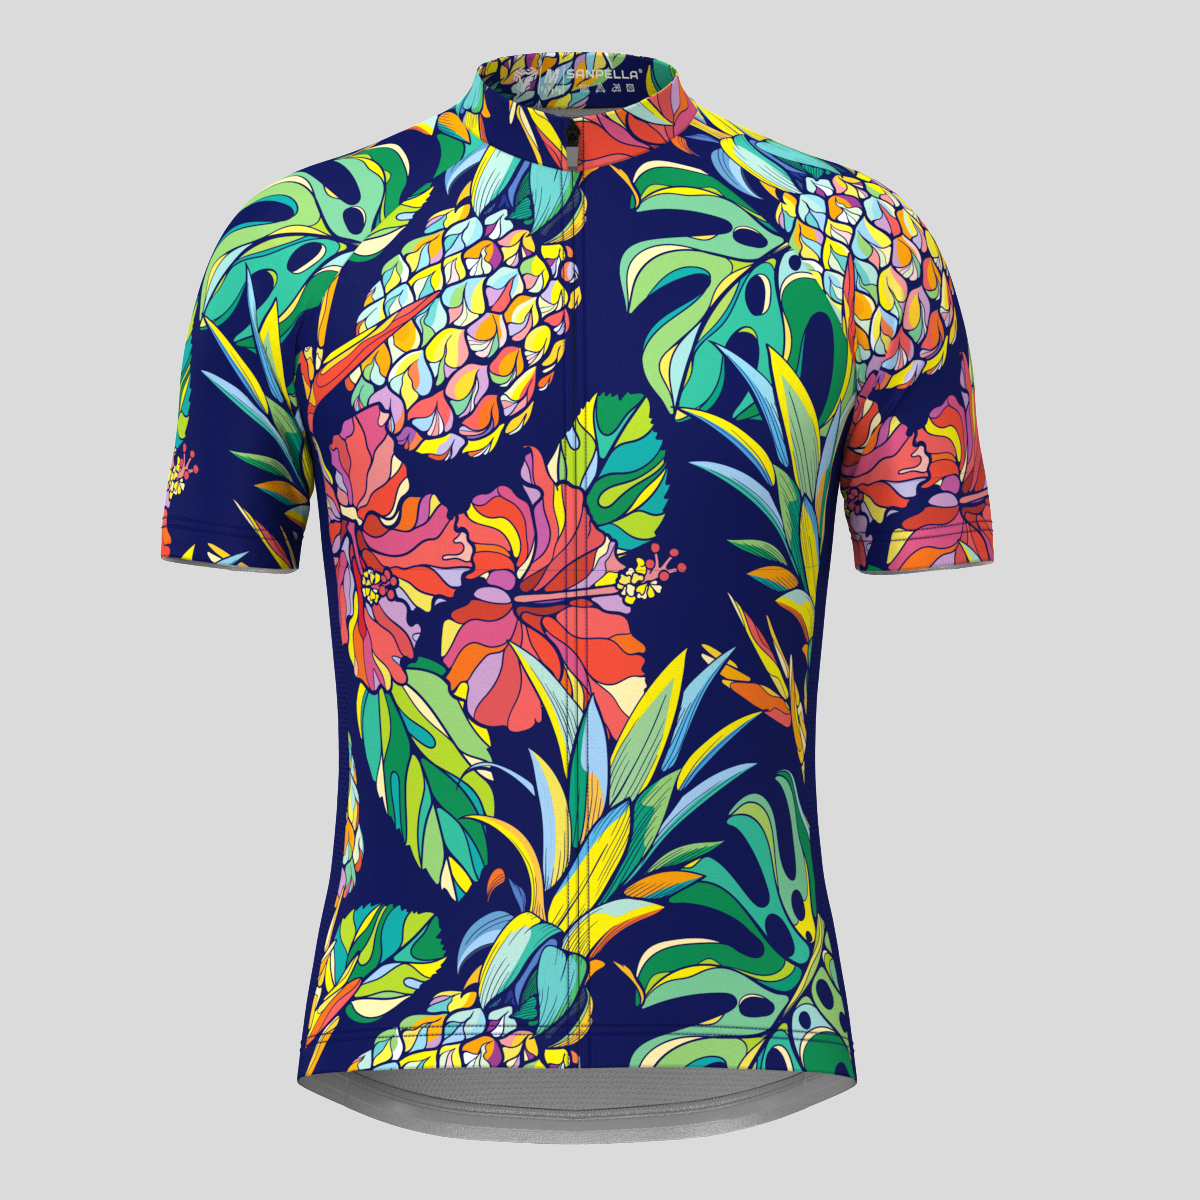 Colorful Tropical Pineapple Men's Cycling Jersey